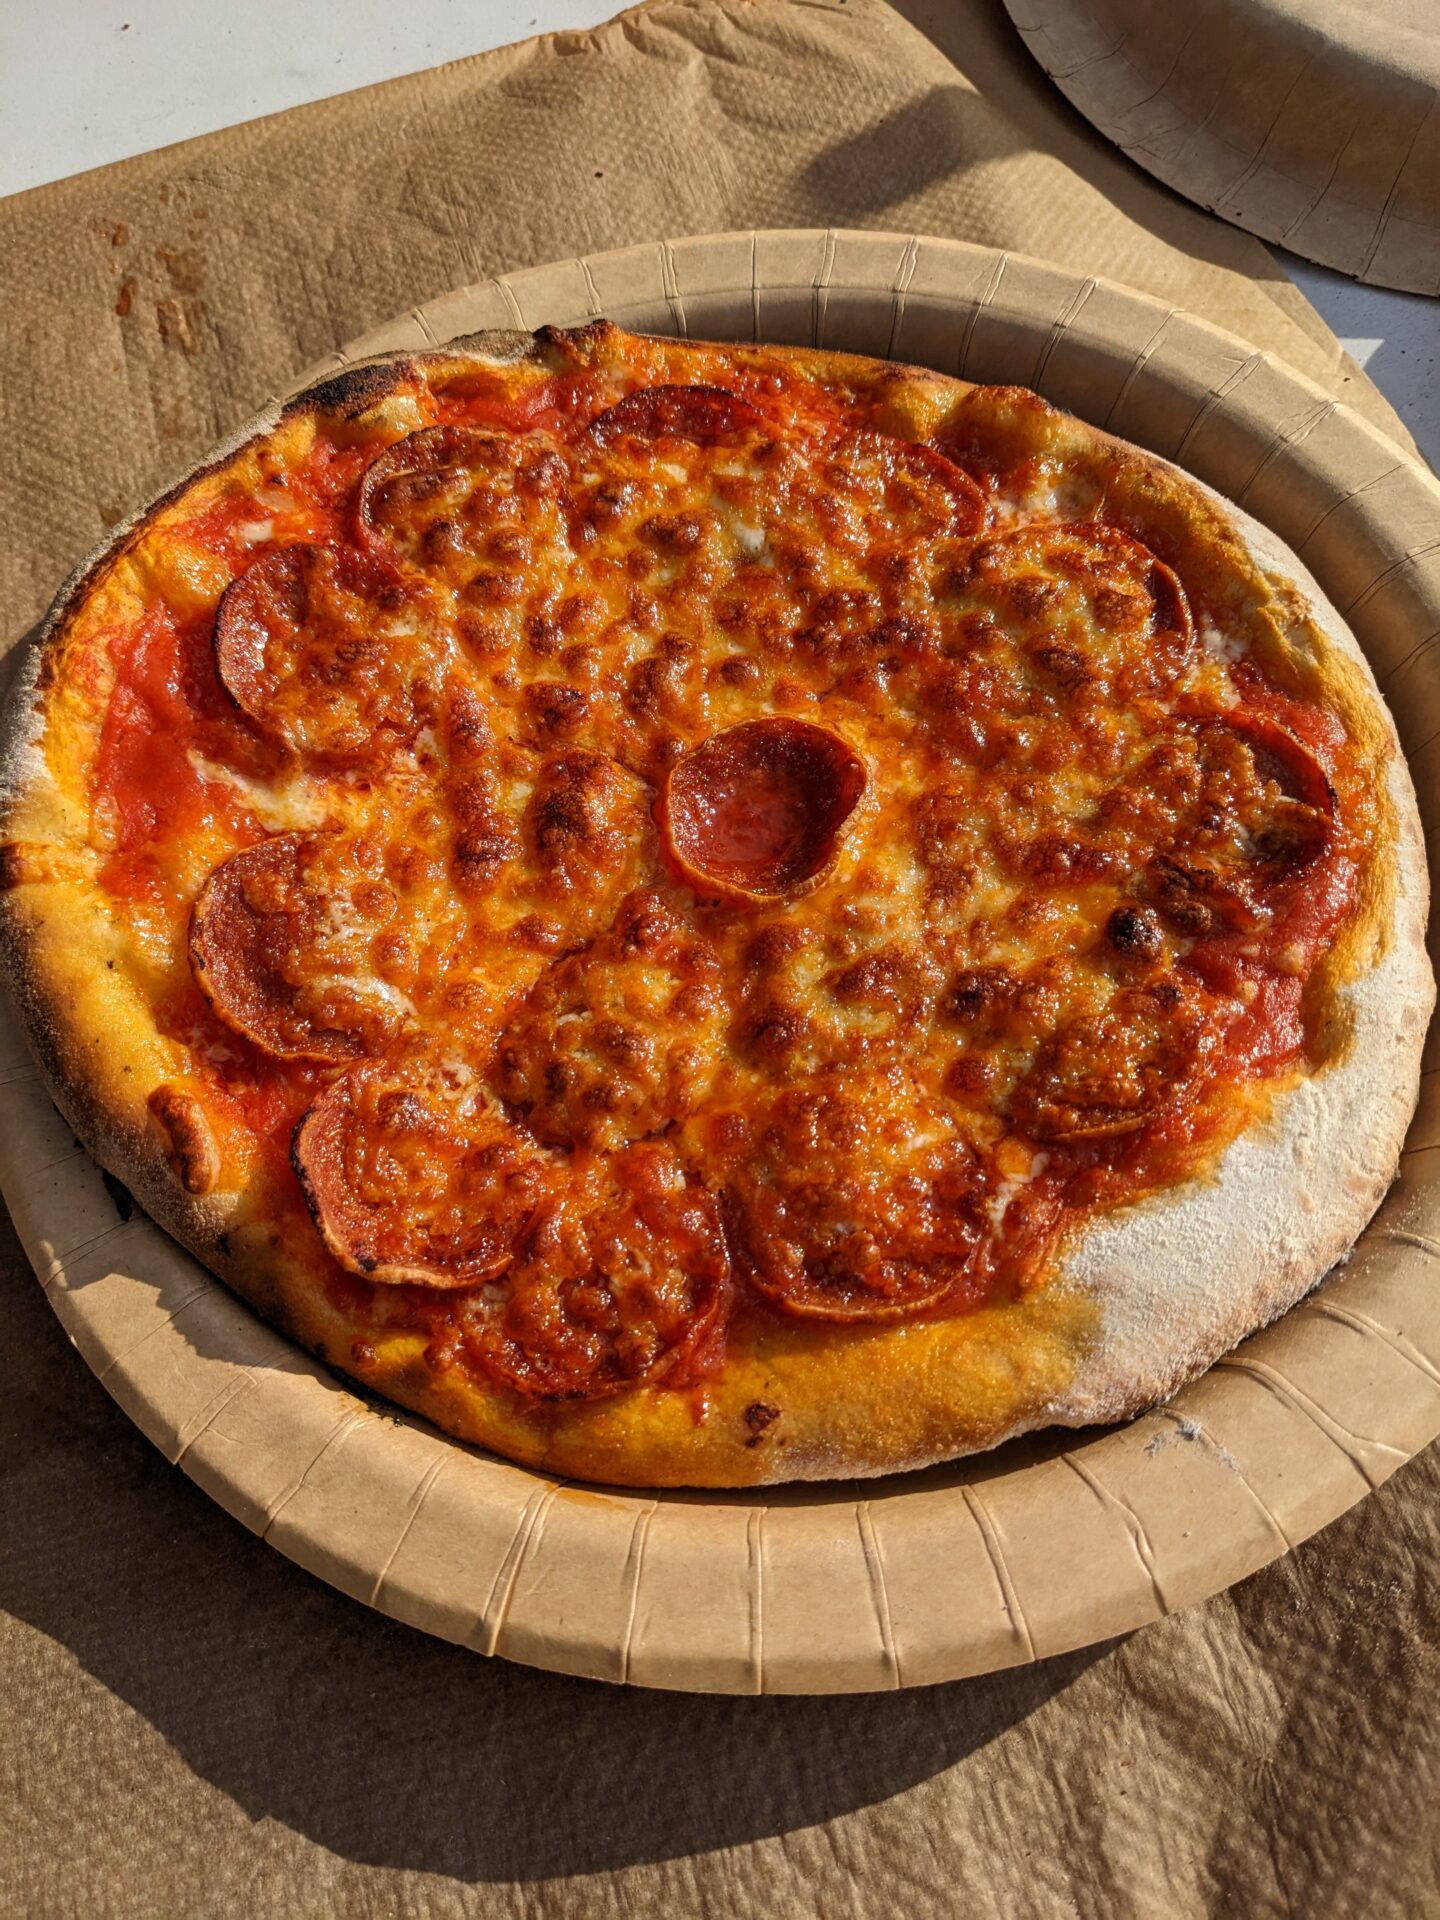 Pizza nights at Wytch Wood Camping & Glamping | Somerset